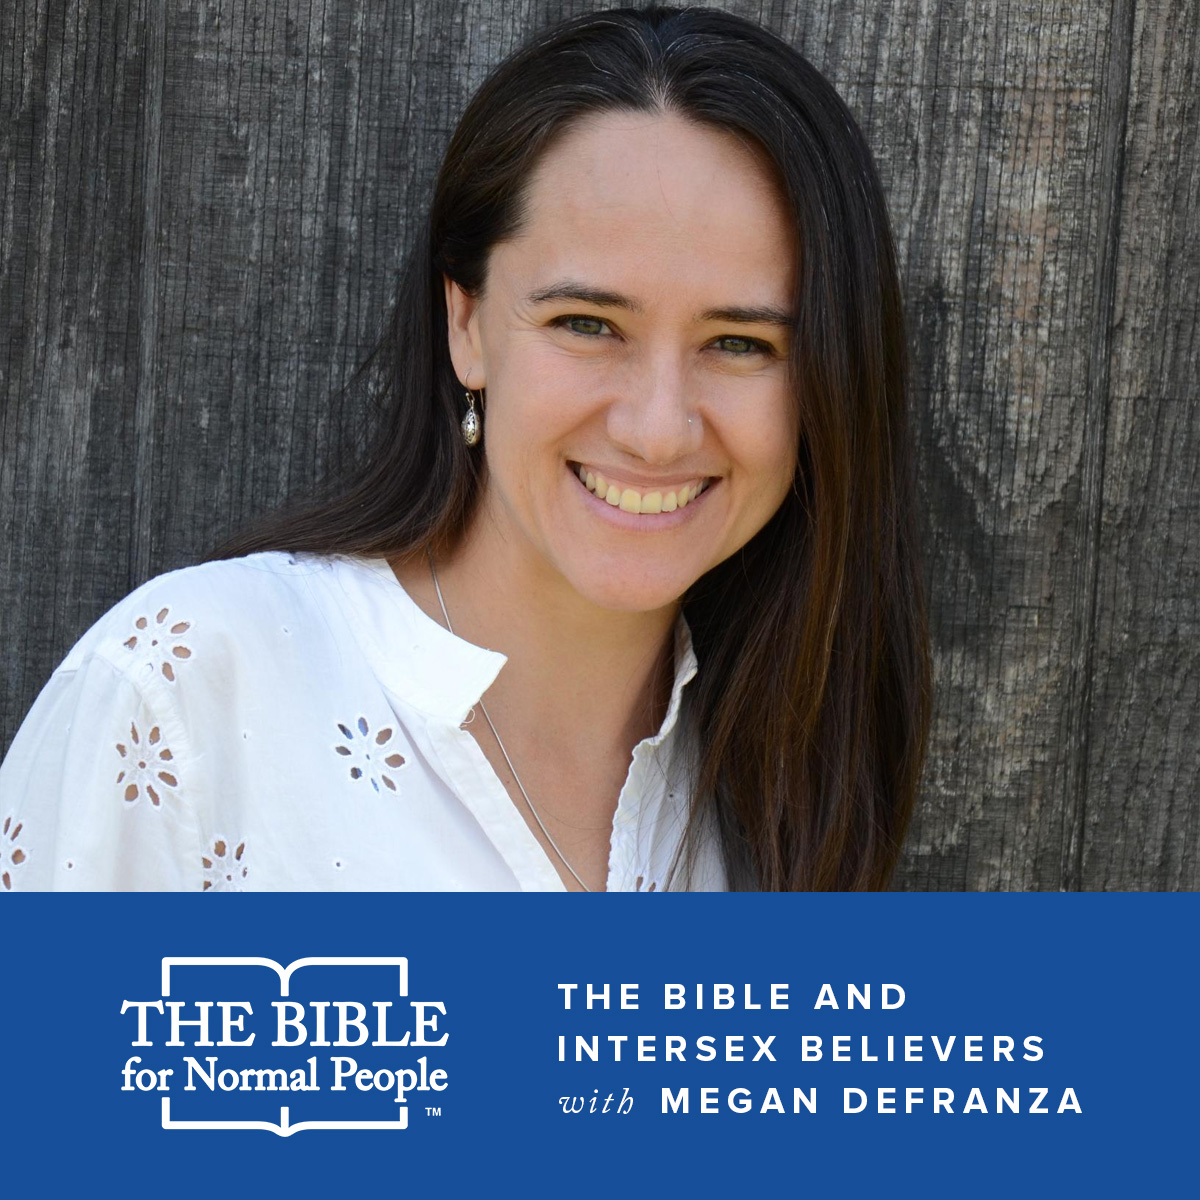 Interview with Megan DeFranza: The Bible and Intersex Believers